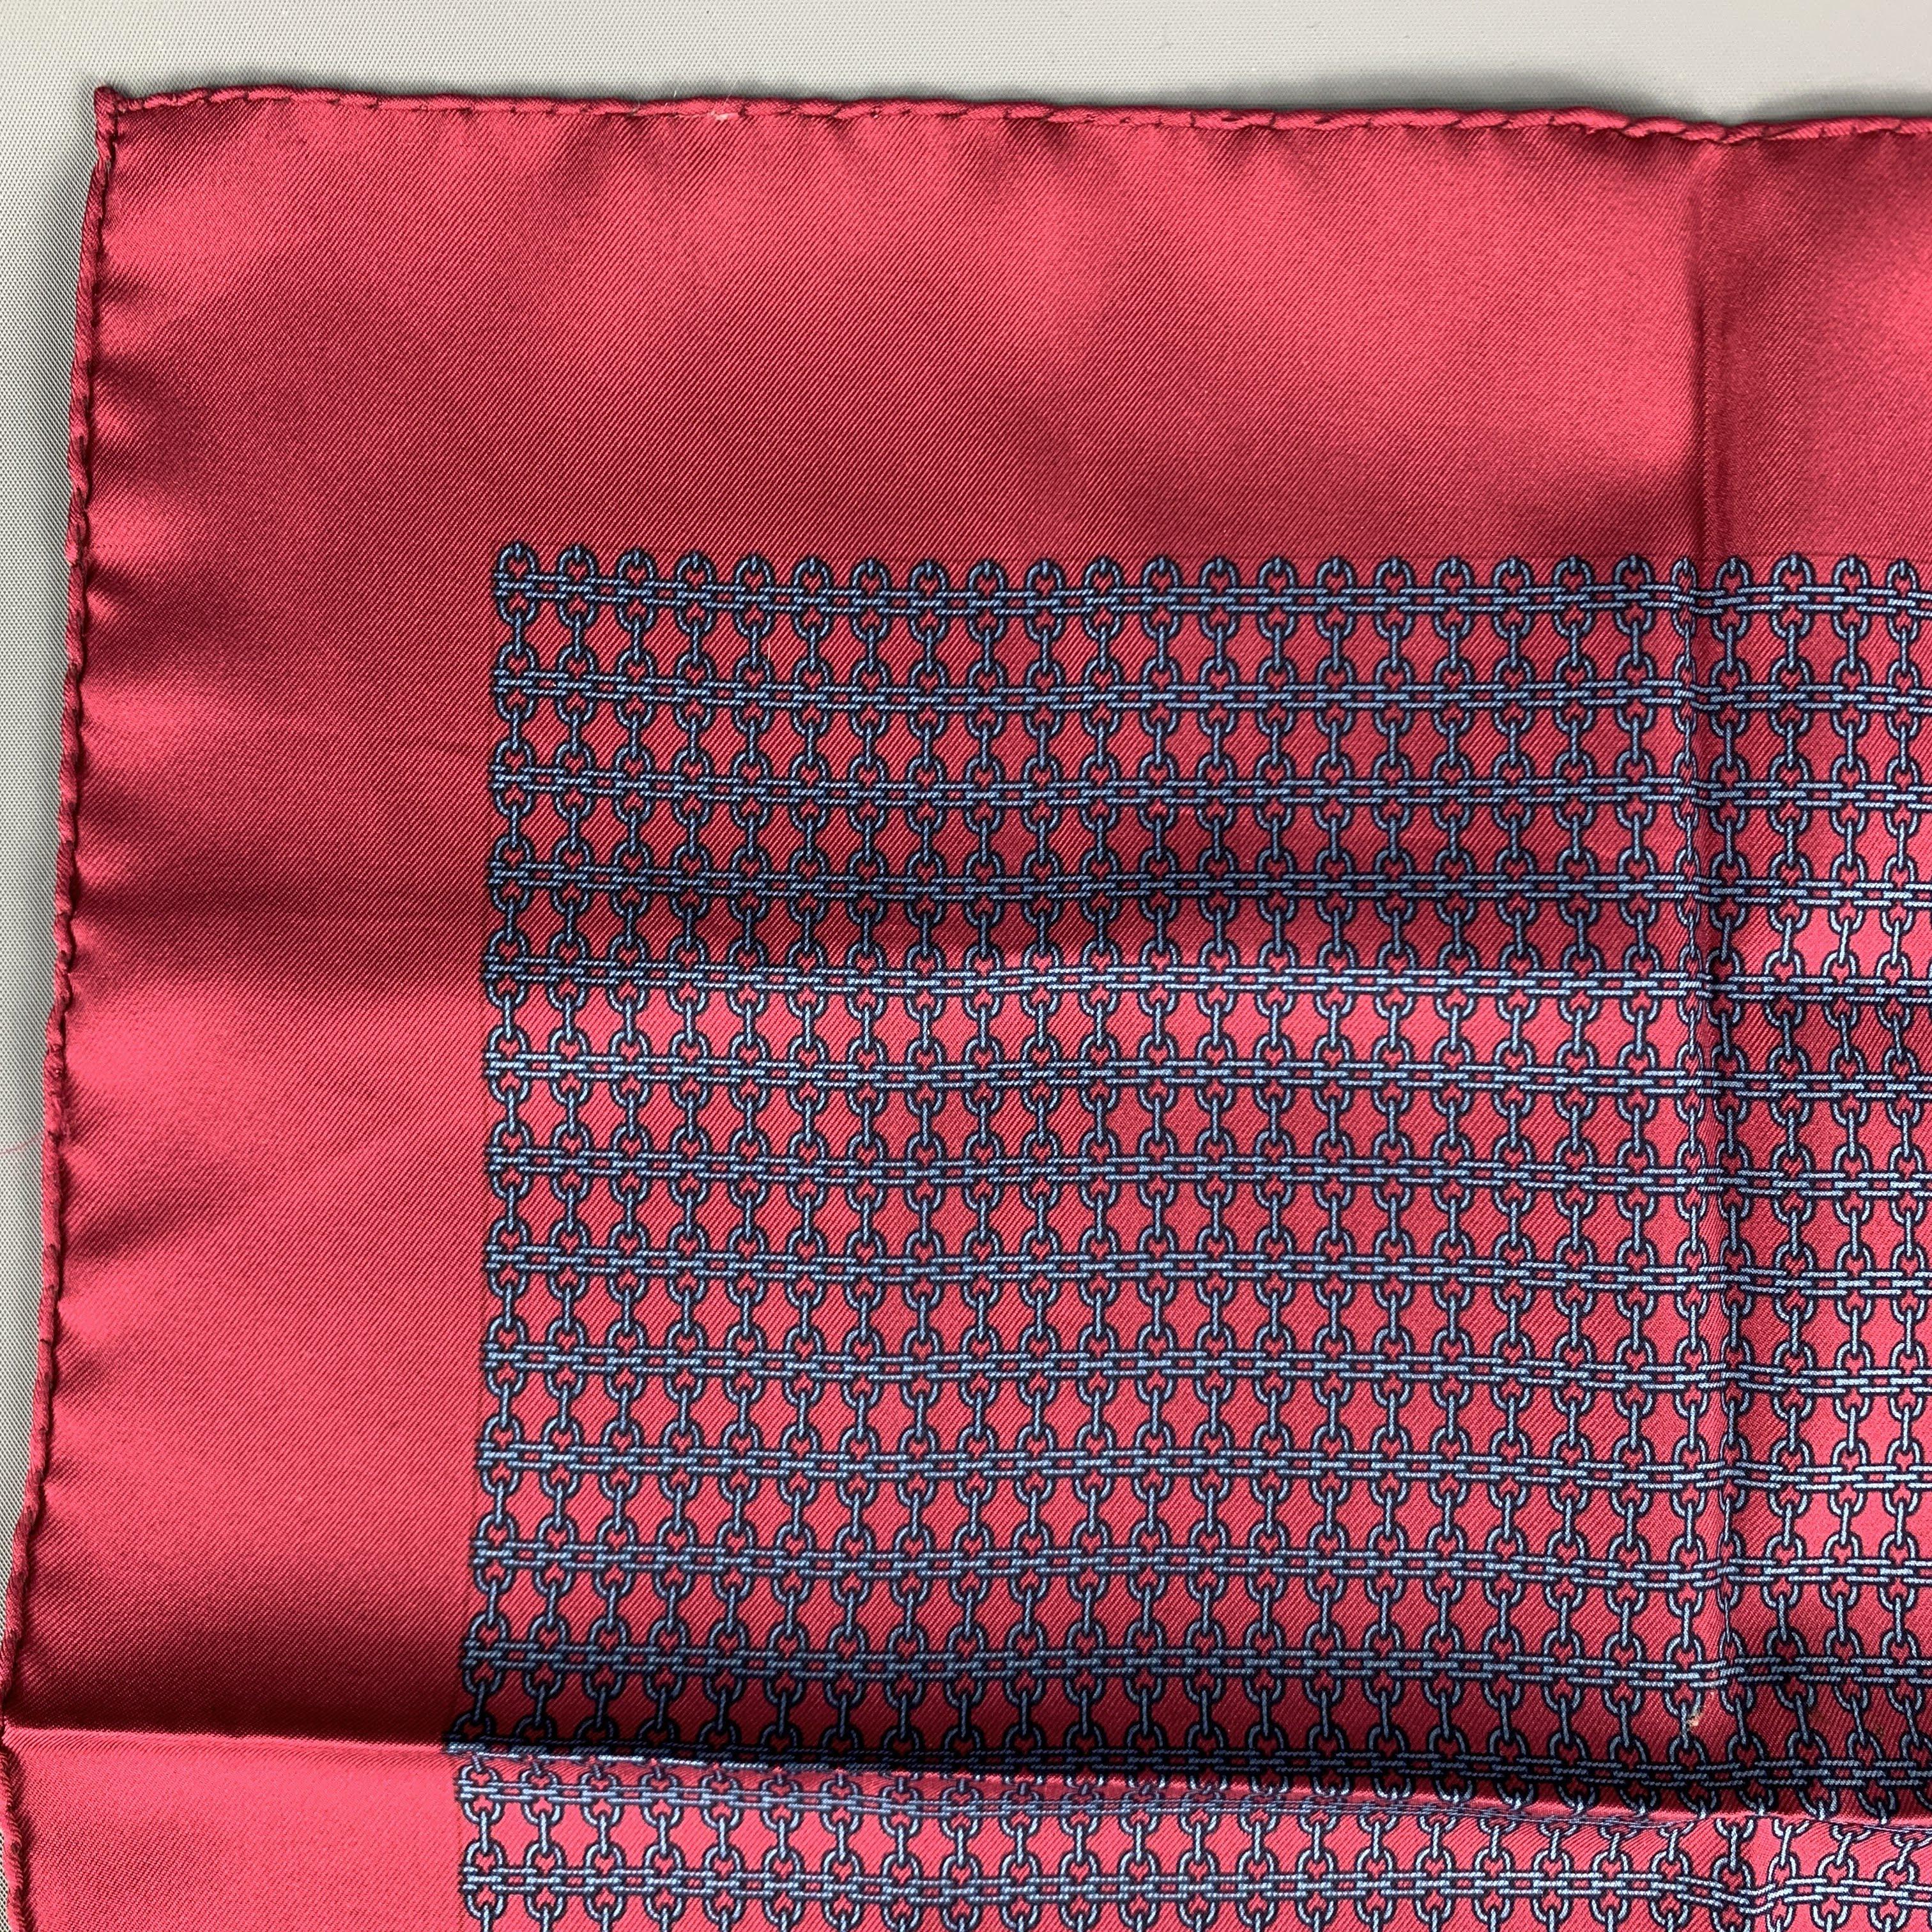 Vintage HERMES Pocket Square comes in a burgundy silk  with all over 